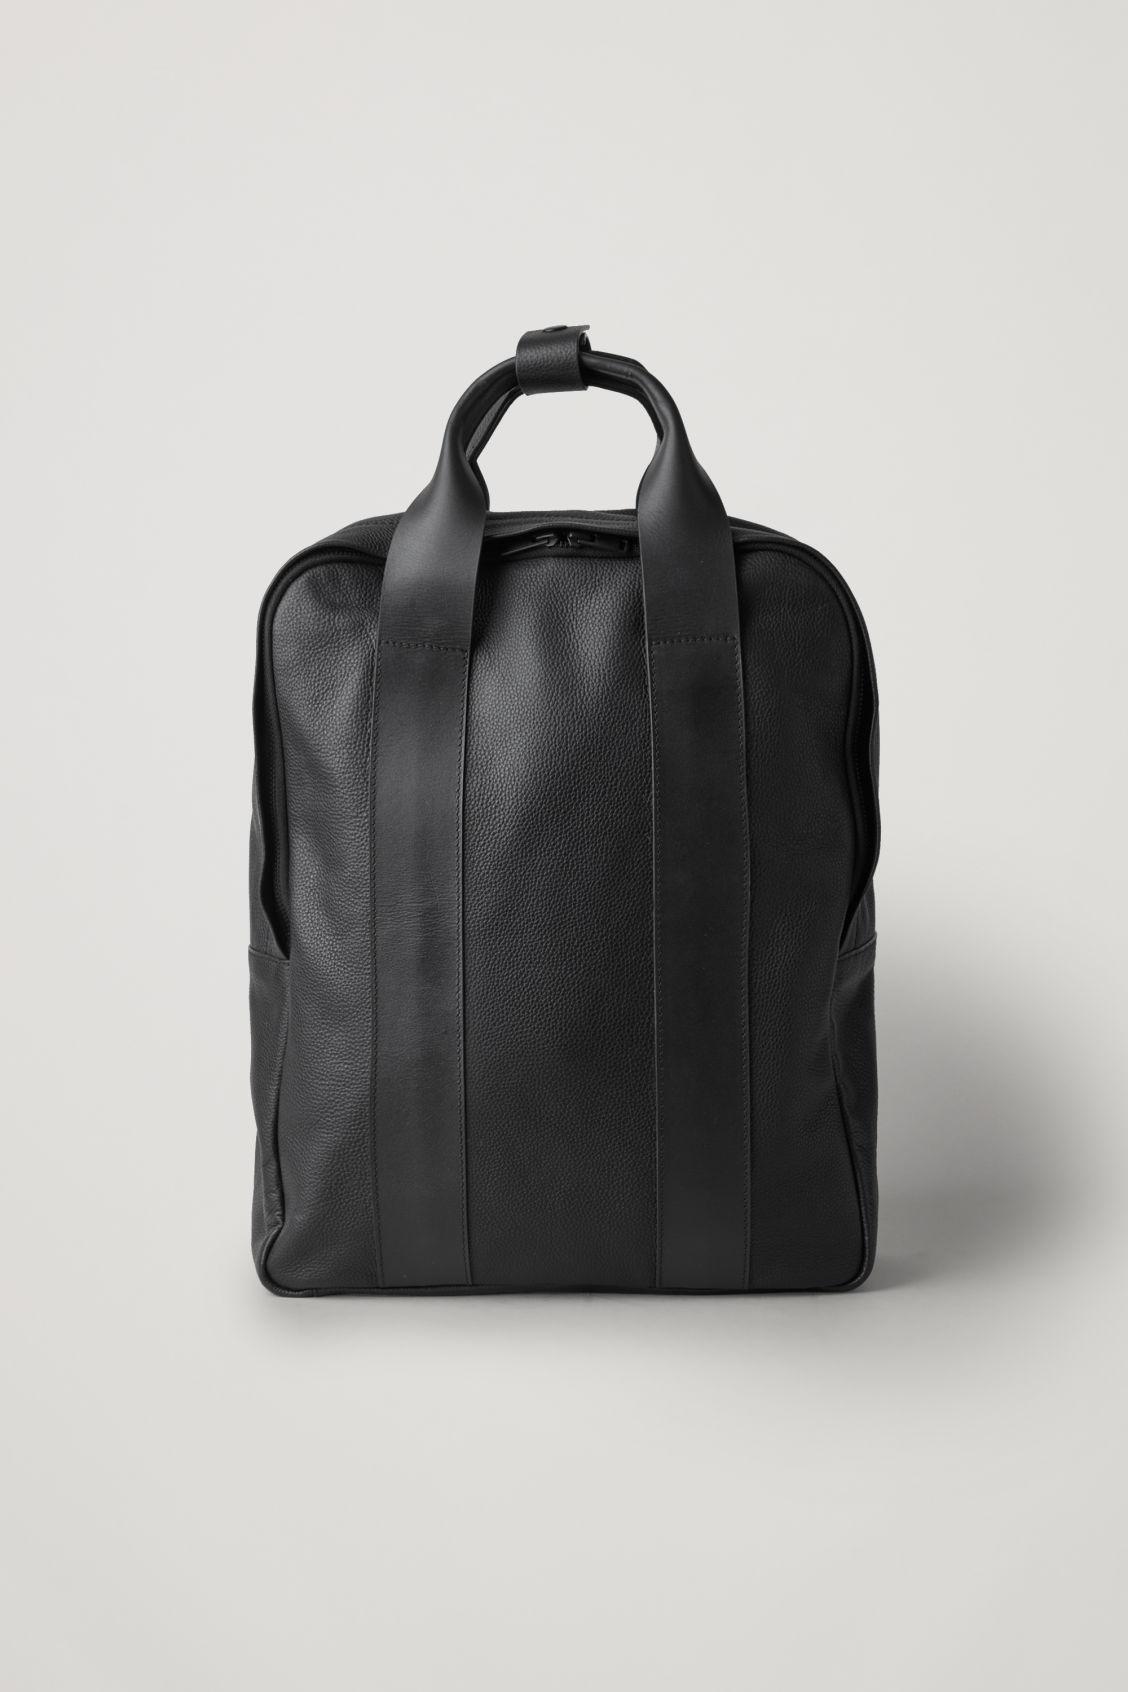 COS Grained Leather Tote Backpack in Black for Men | Lyst